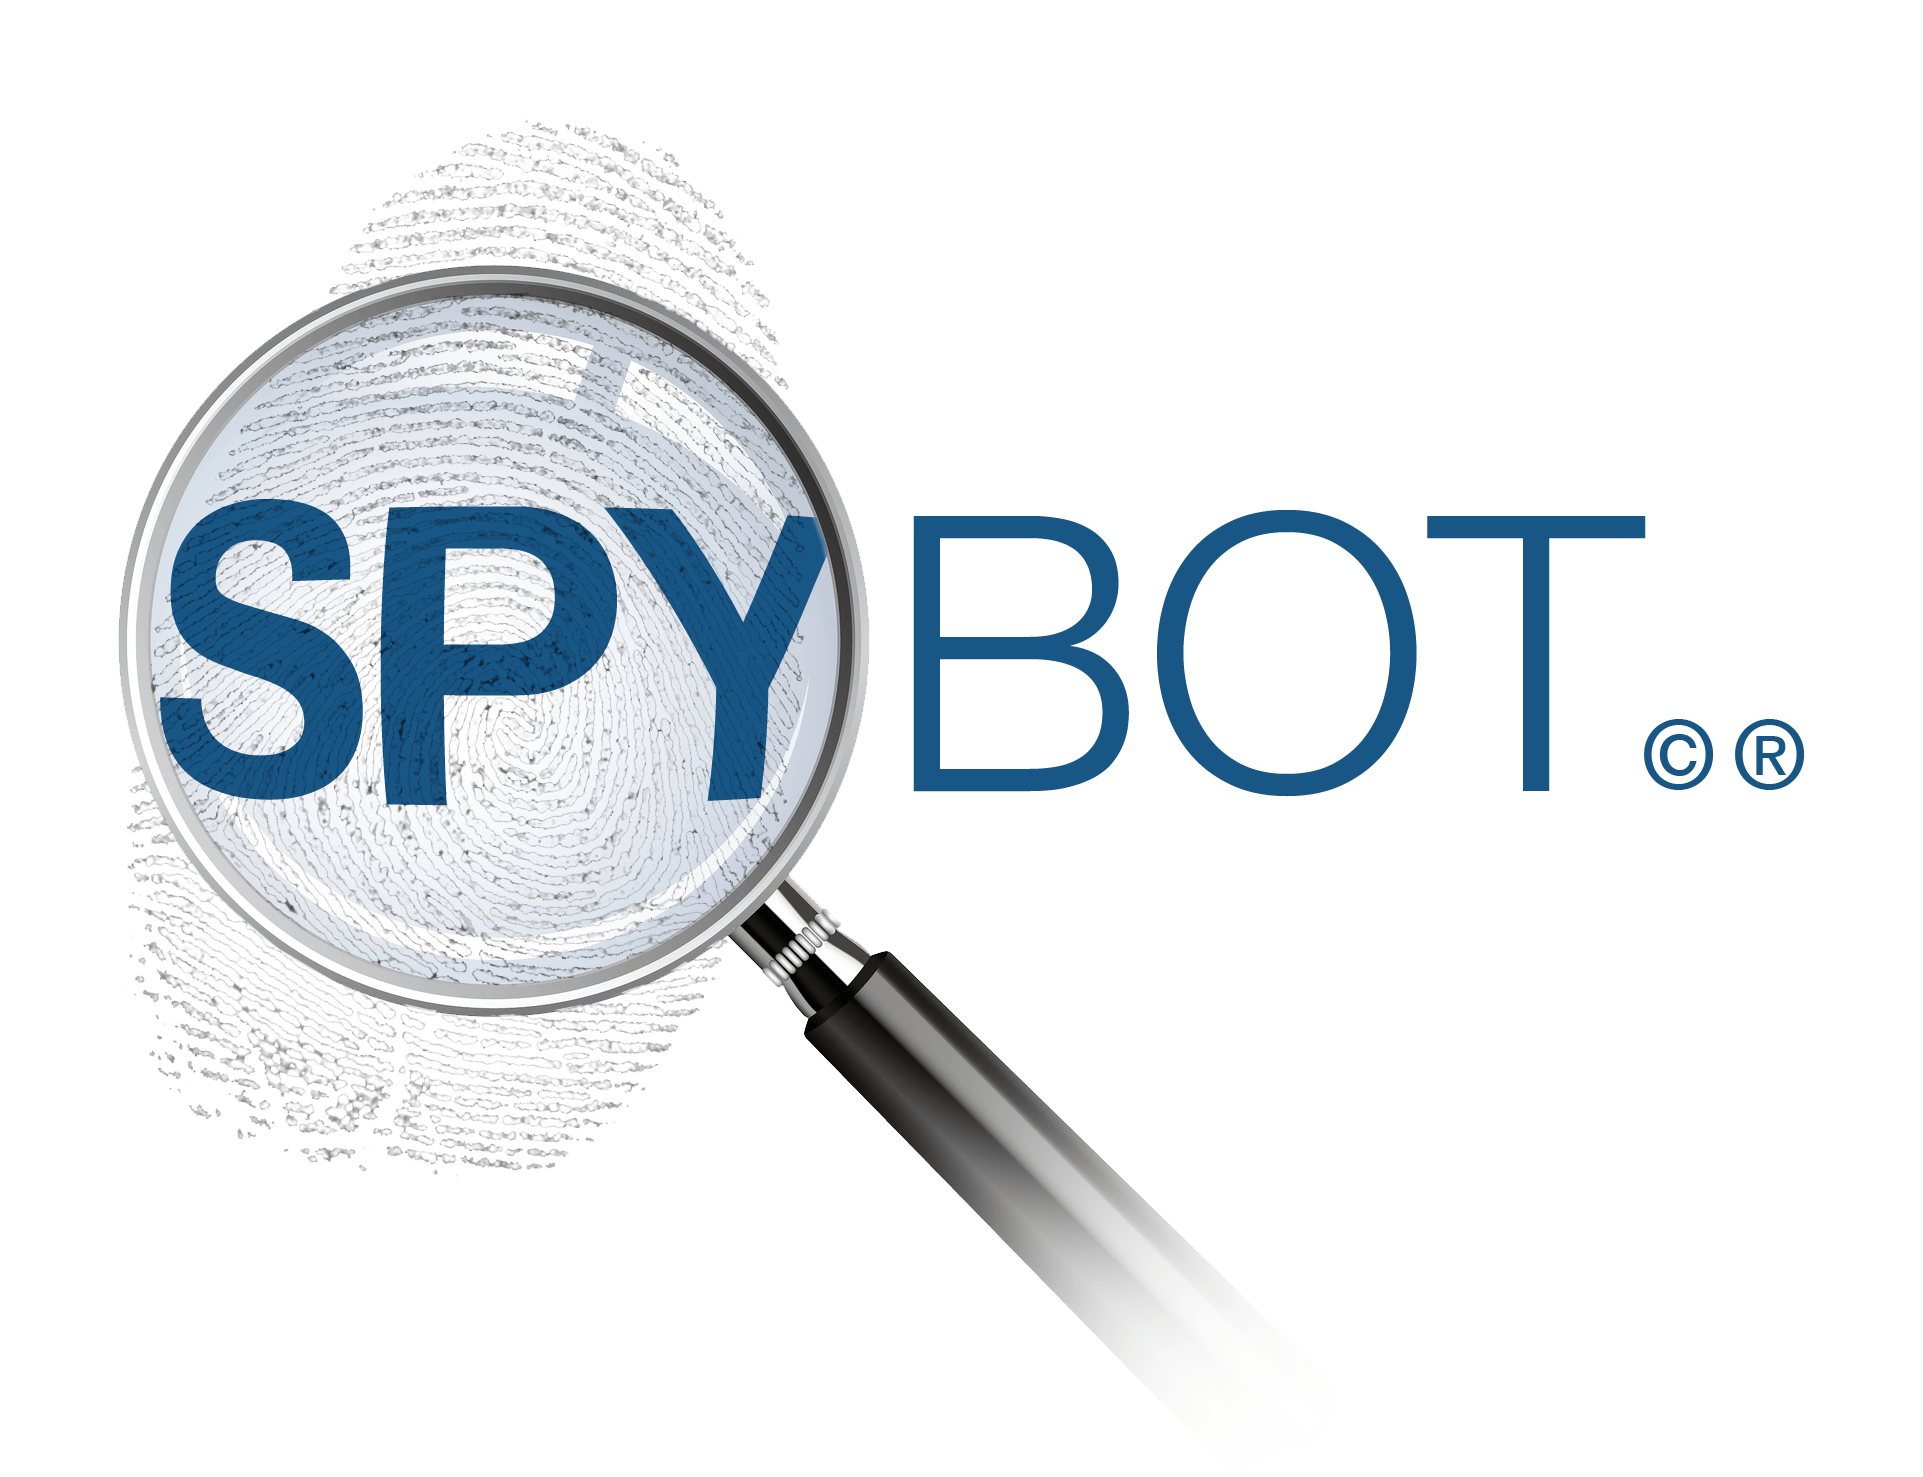 spybot search and destroy free